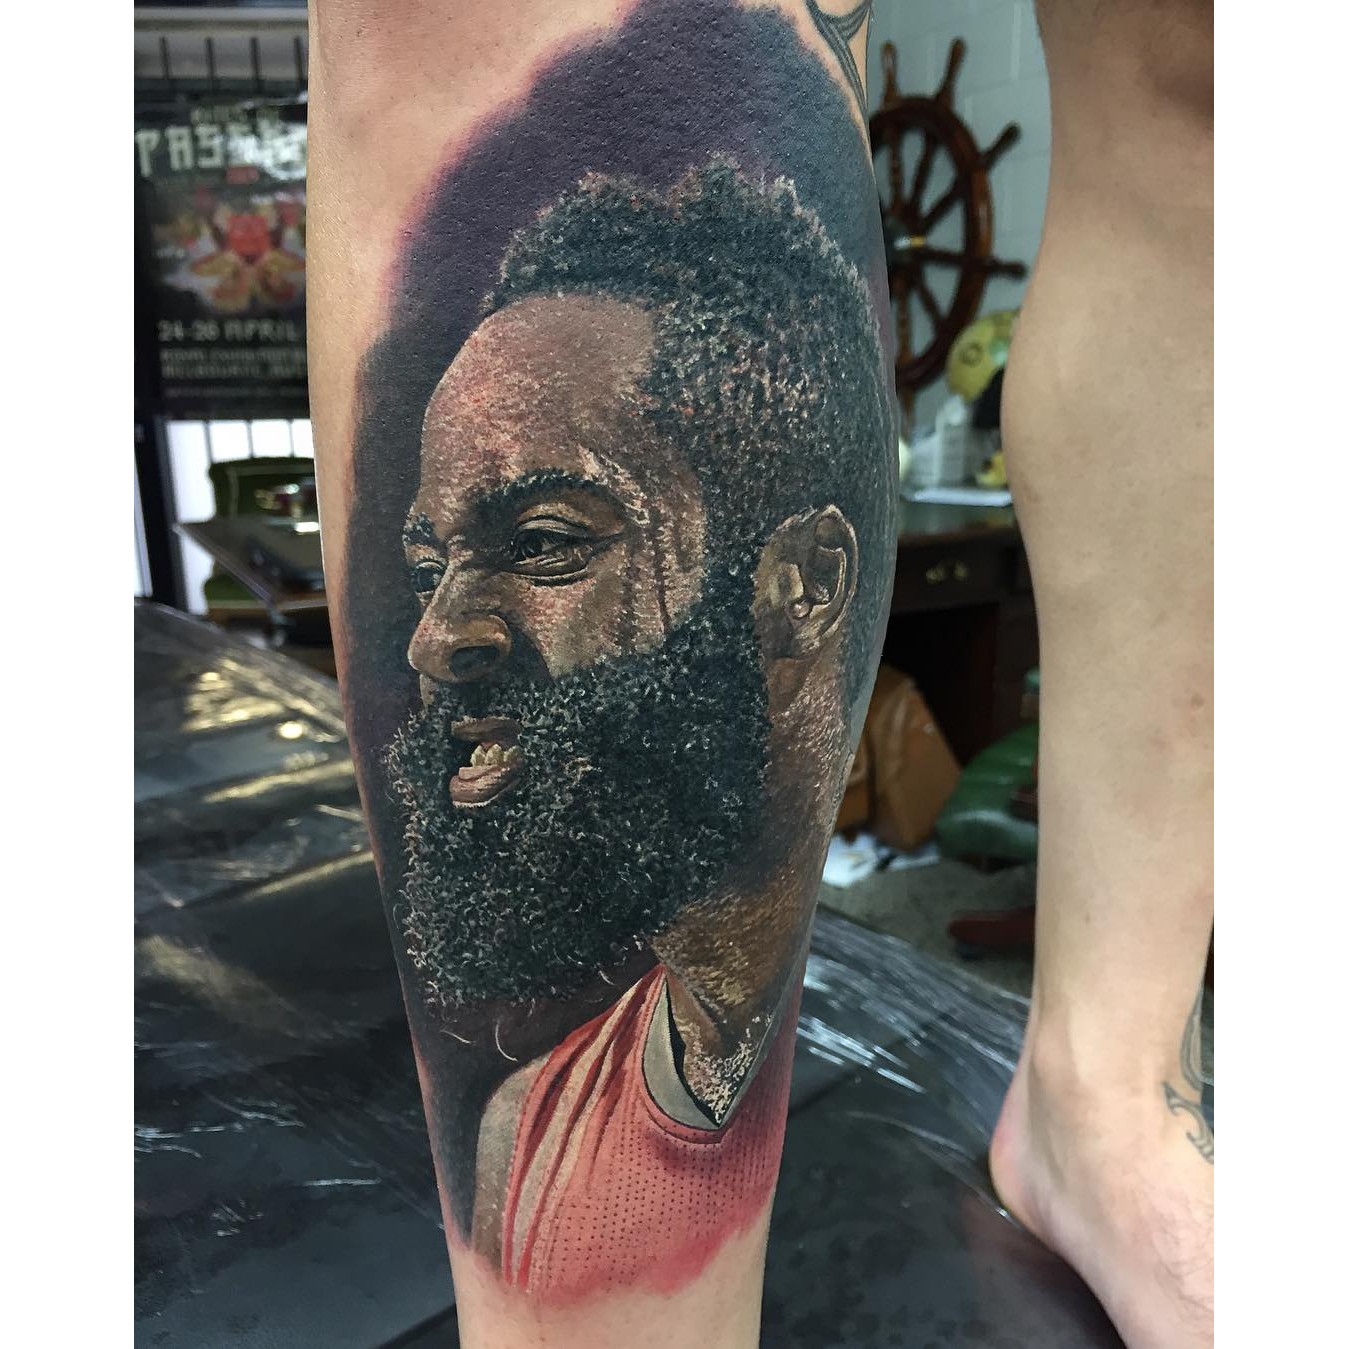 Steve Butcher Tattoo- Find the best tattoo artists, anywhere in the world.